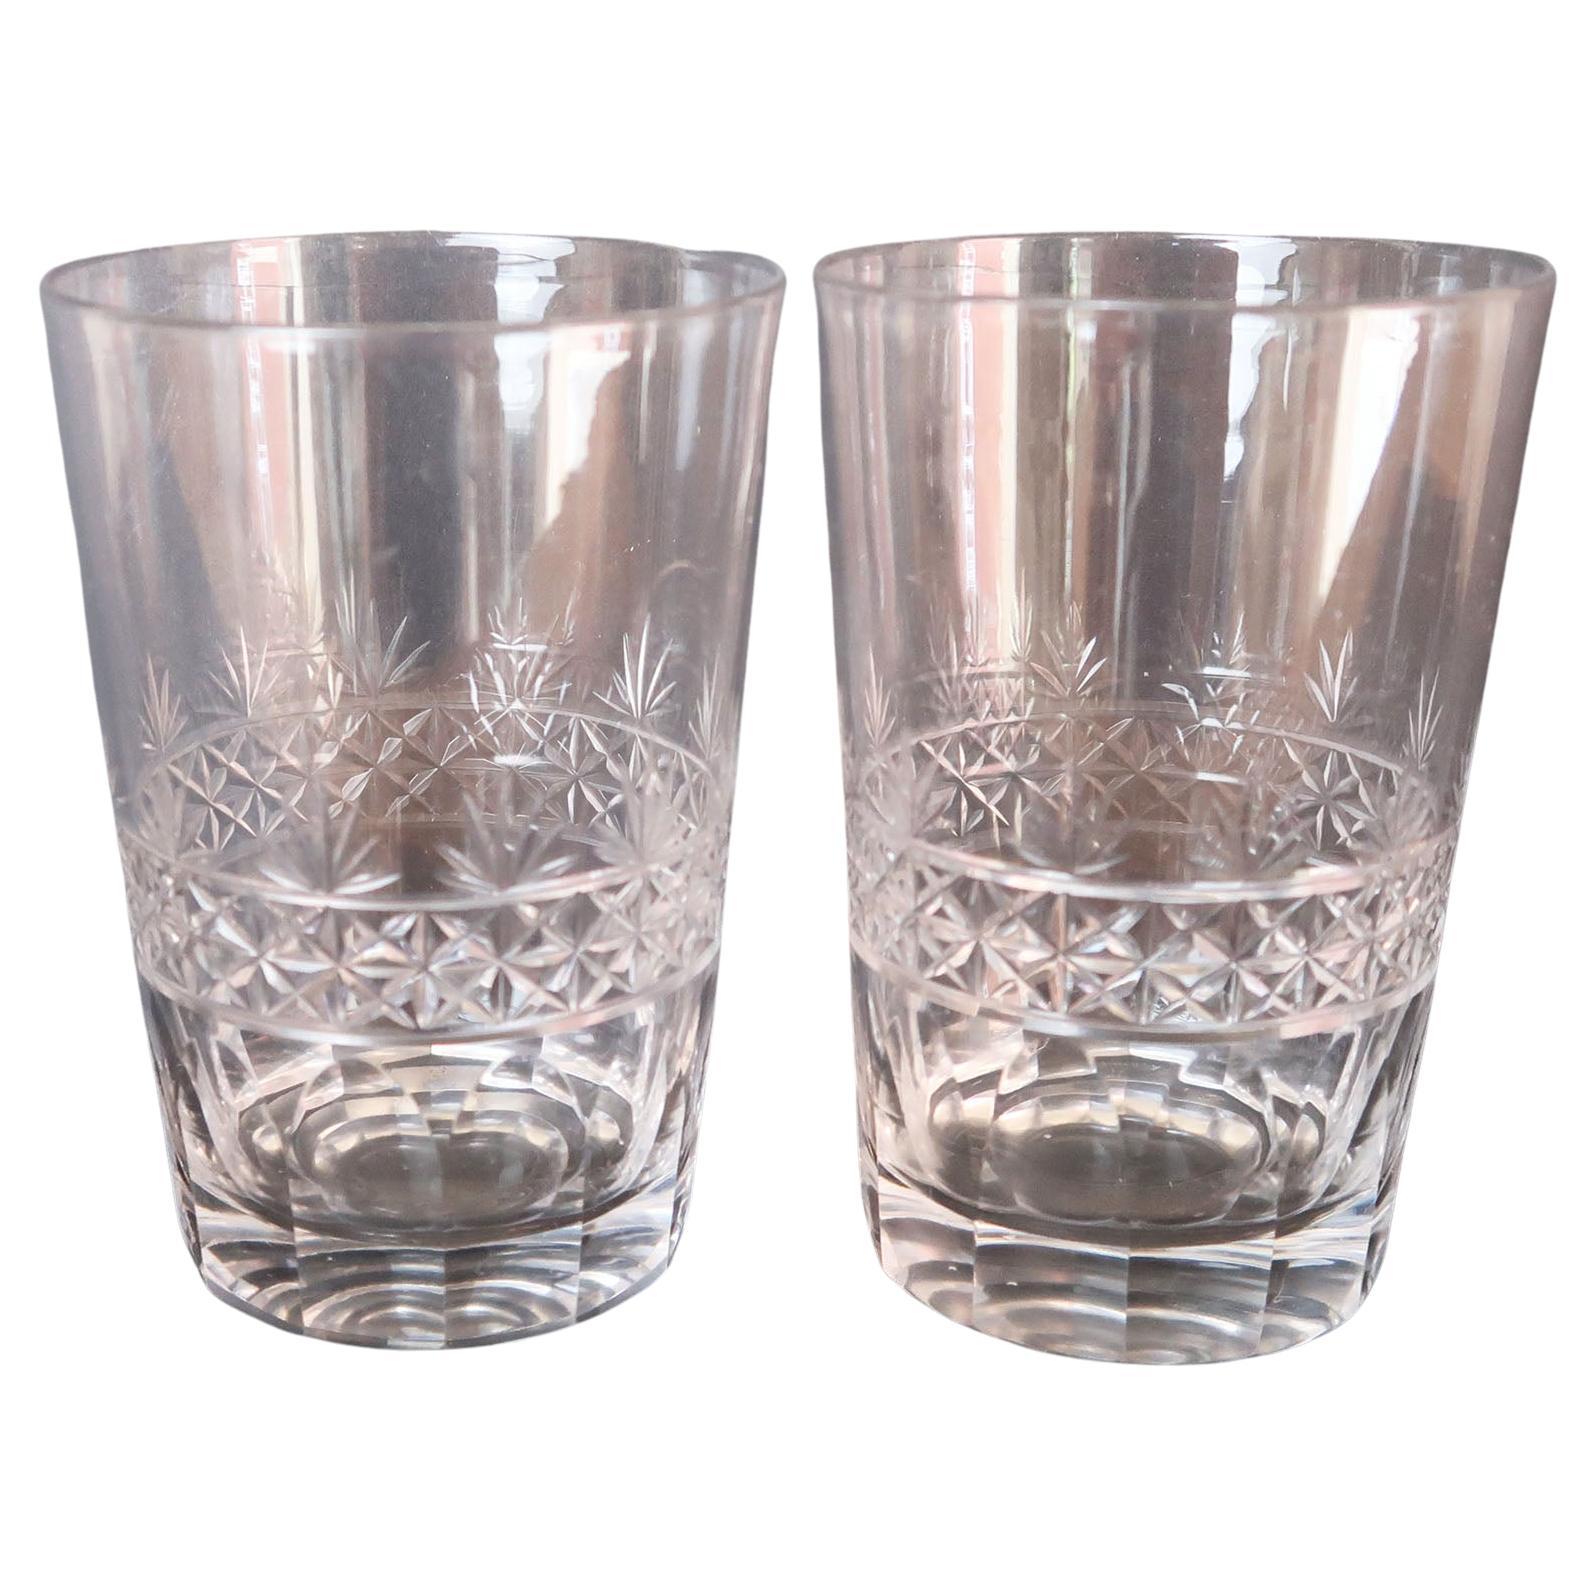 Pair of Antique Georgian Style Glass Whisky Tumblers